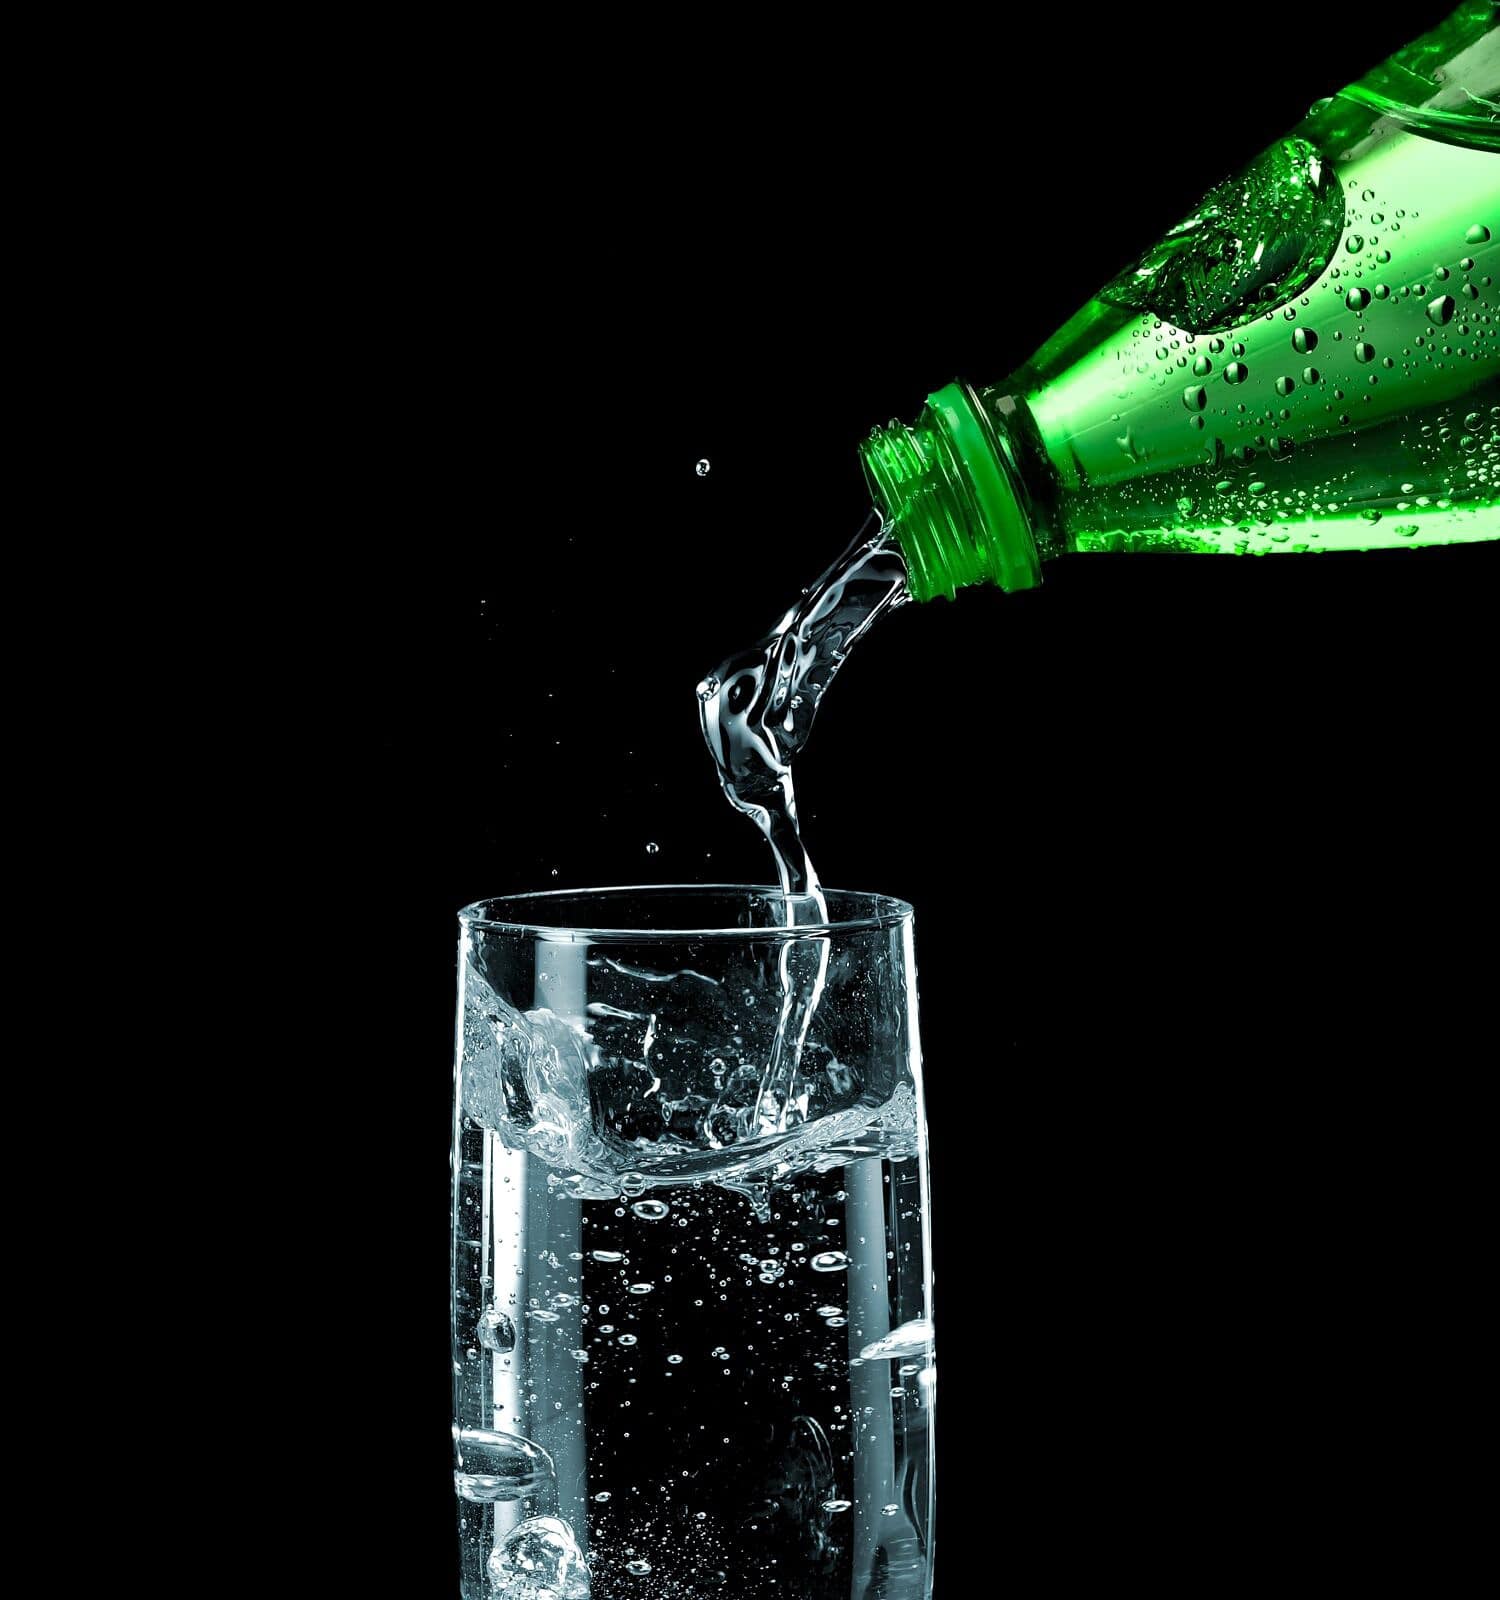 Pouring sparkling water in a glass from a green plastic bottle on black background